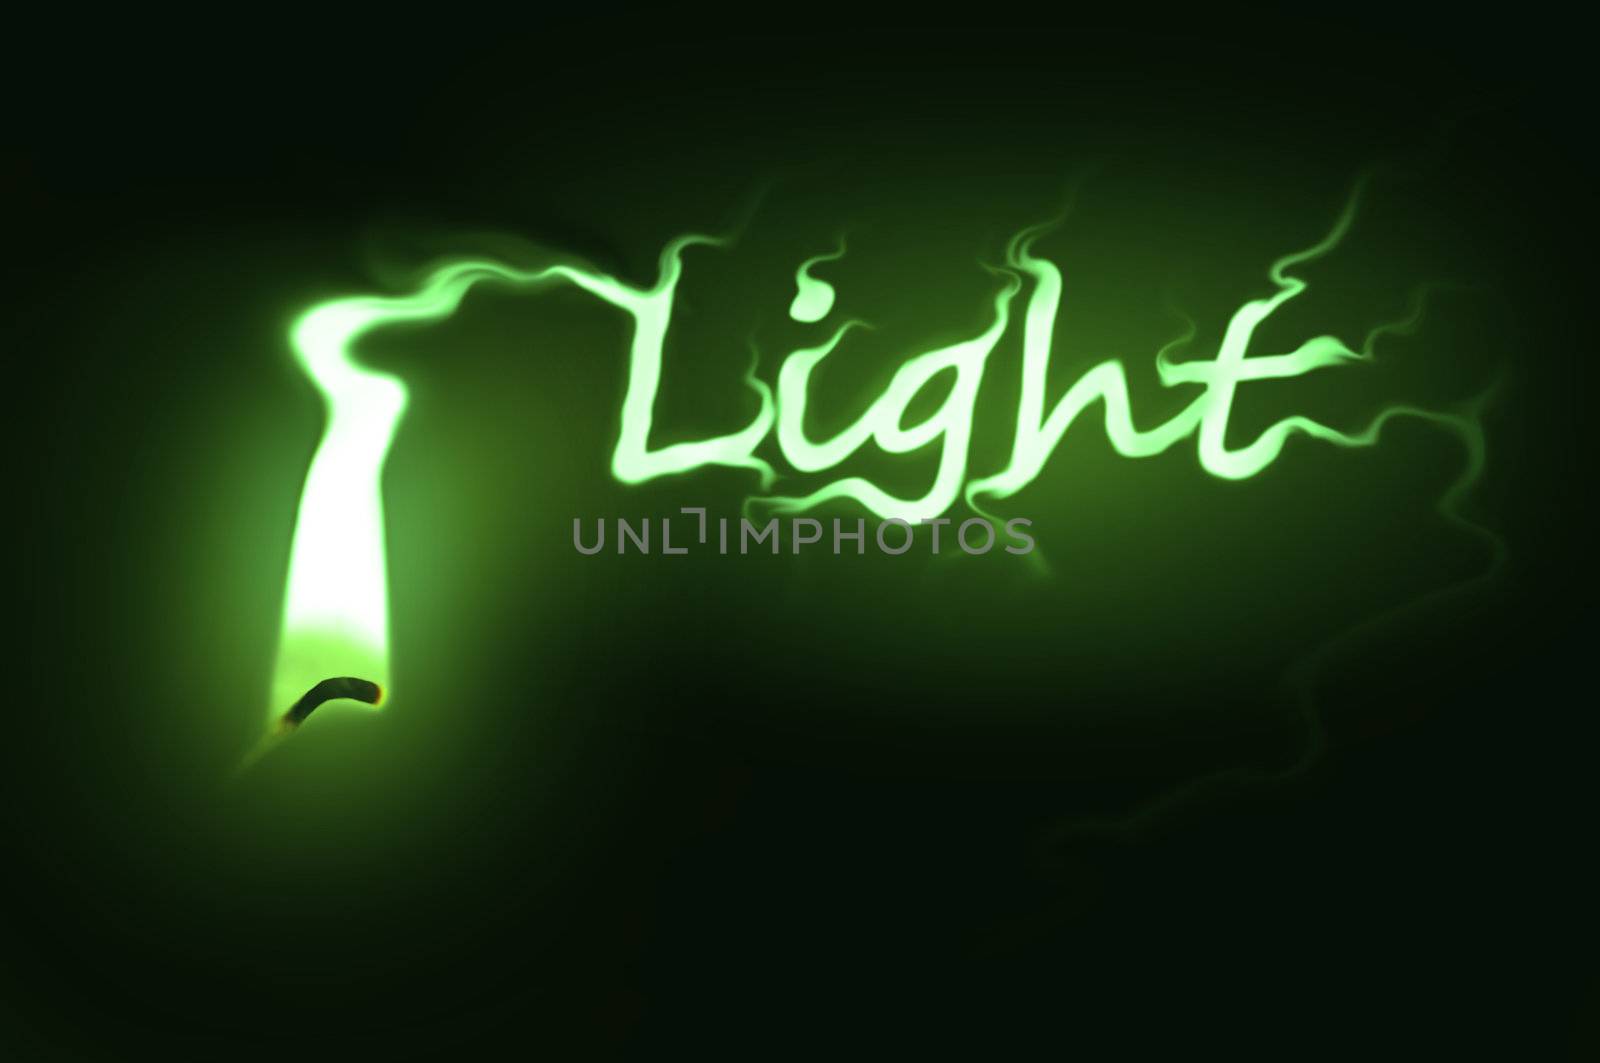 Close up on a single ignited candle wick with green flame morphing into the word 'light' against a black background.